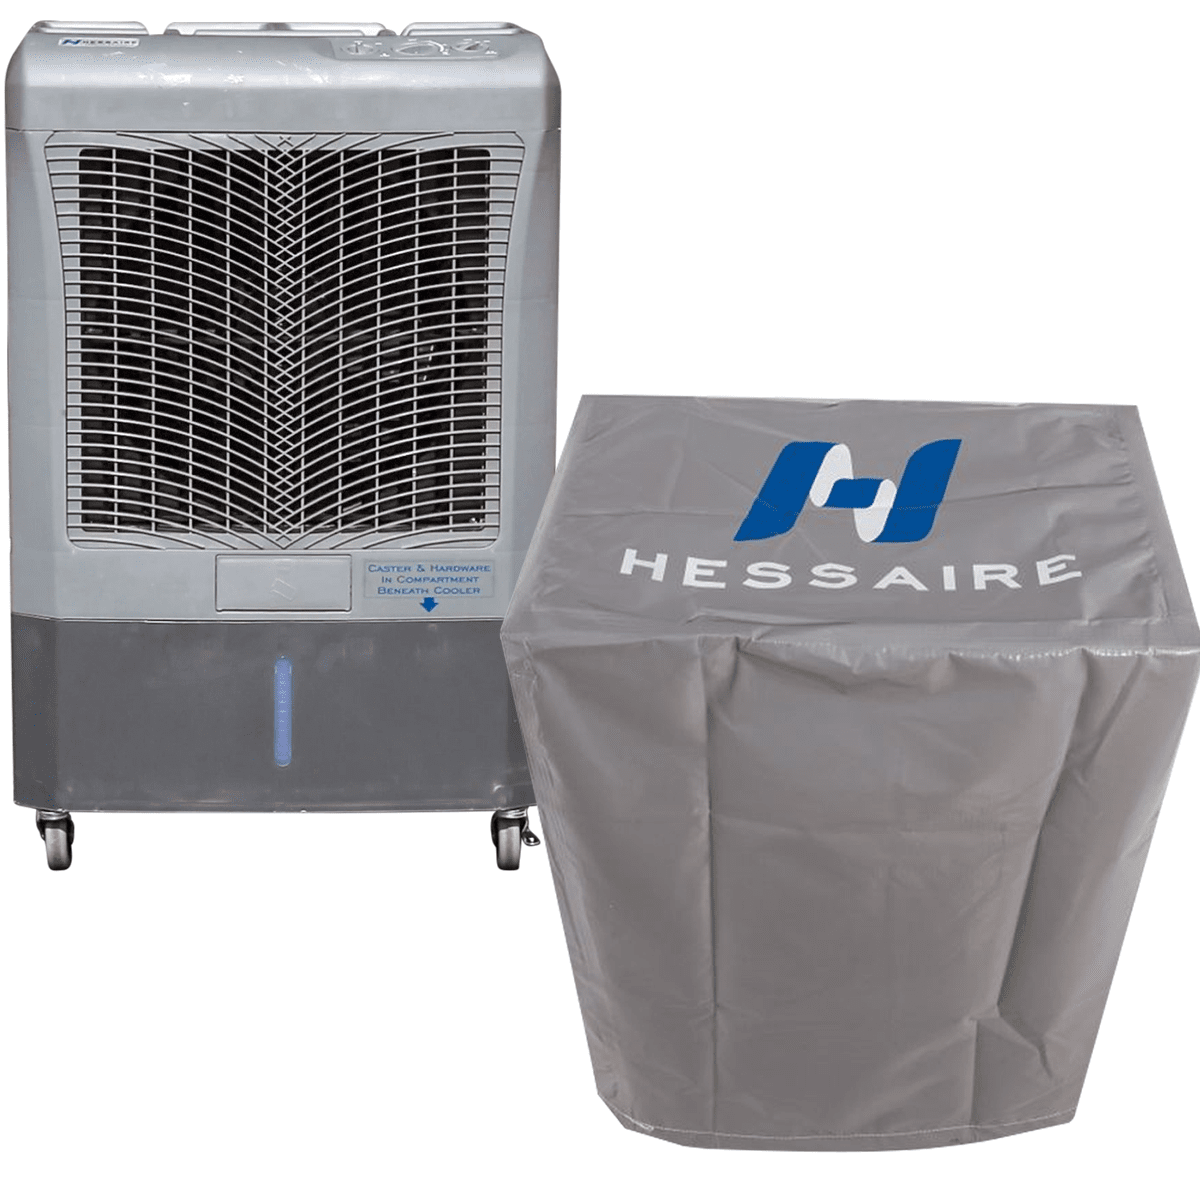 Hessaire MC37M Evaporative Cooler and Cover